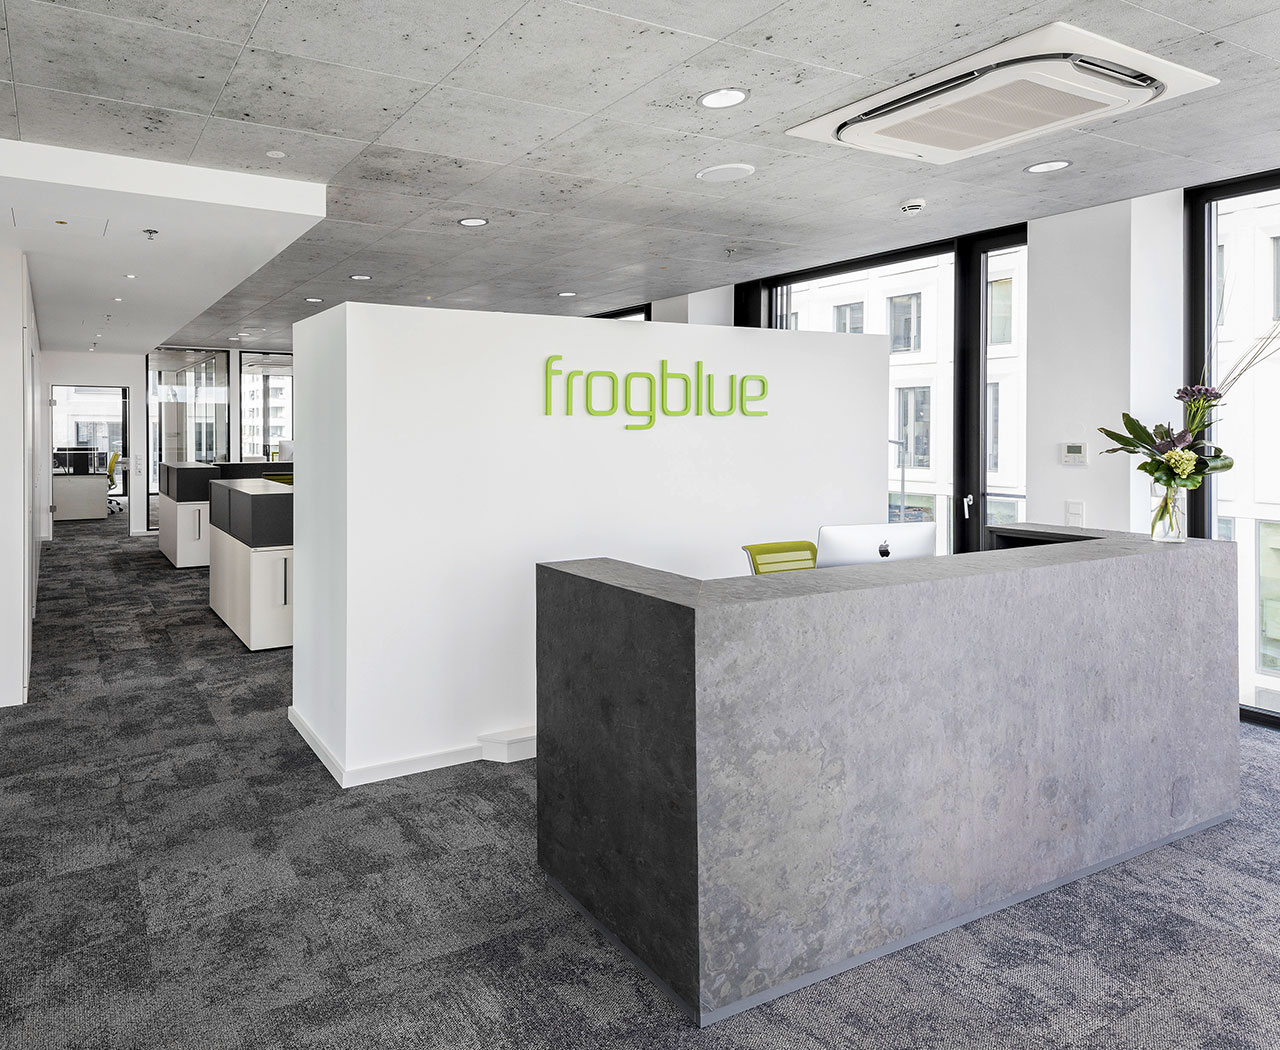 Frogblue Empfang München